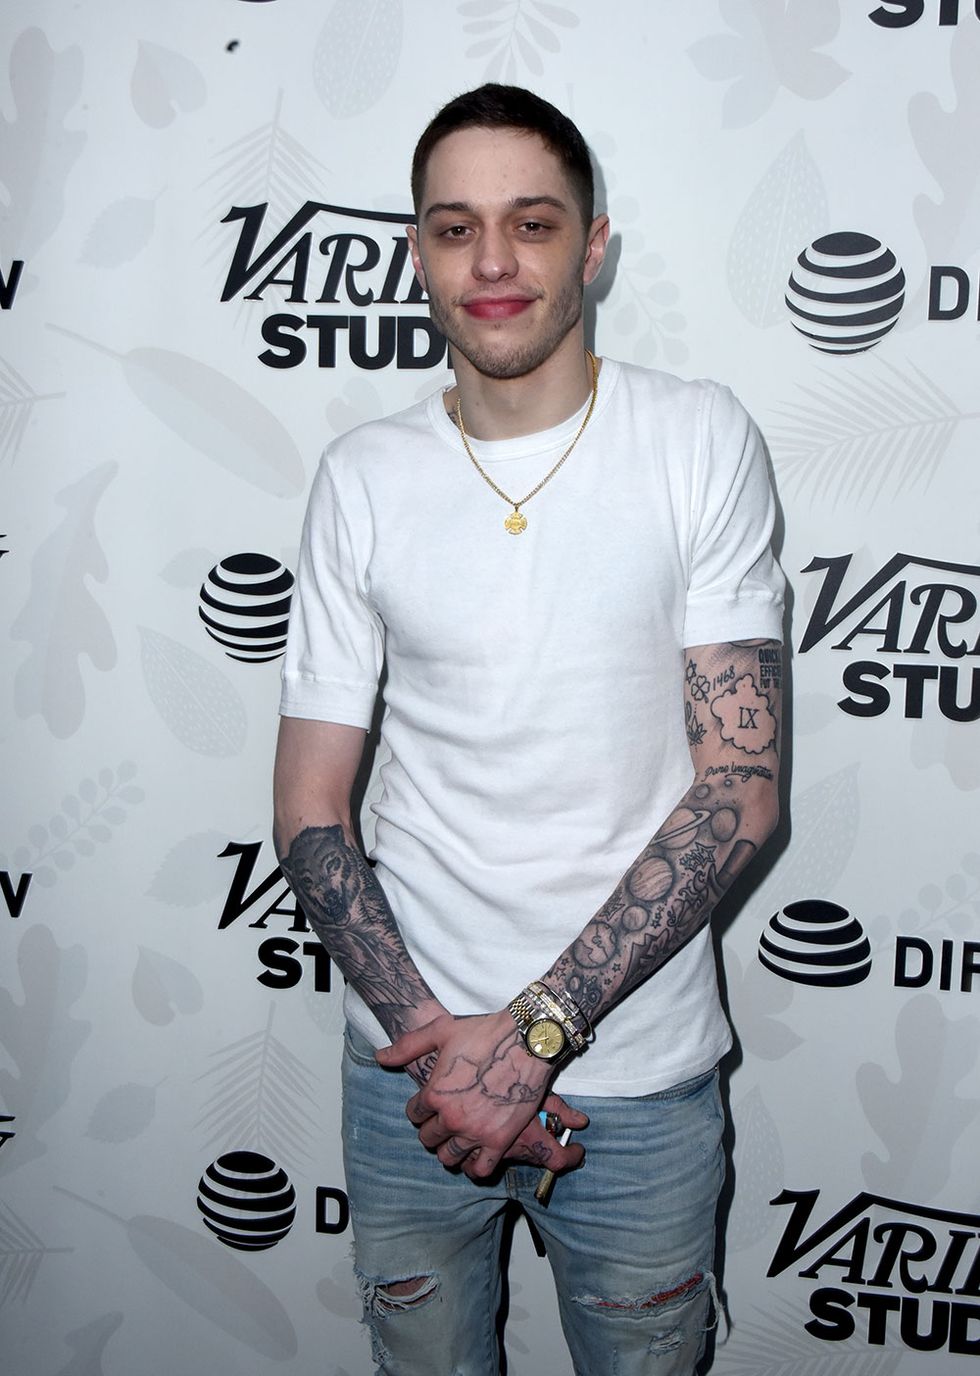 Pete Davidson and Kate Bekinsale planning a holiday together